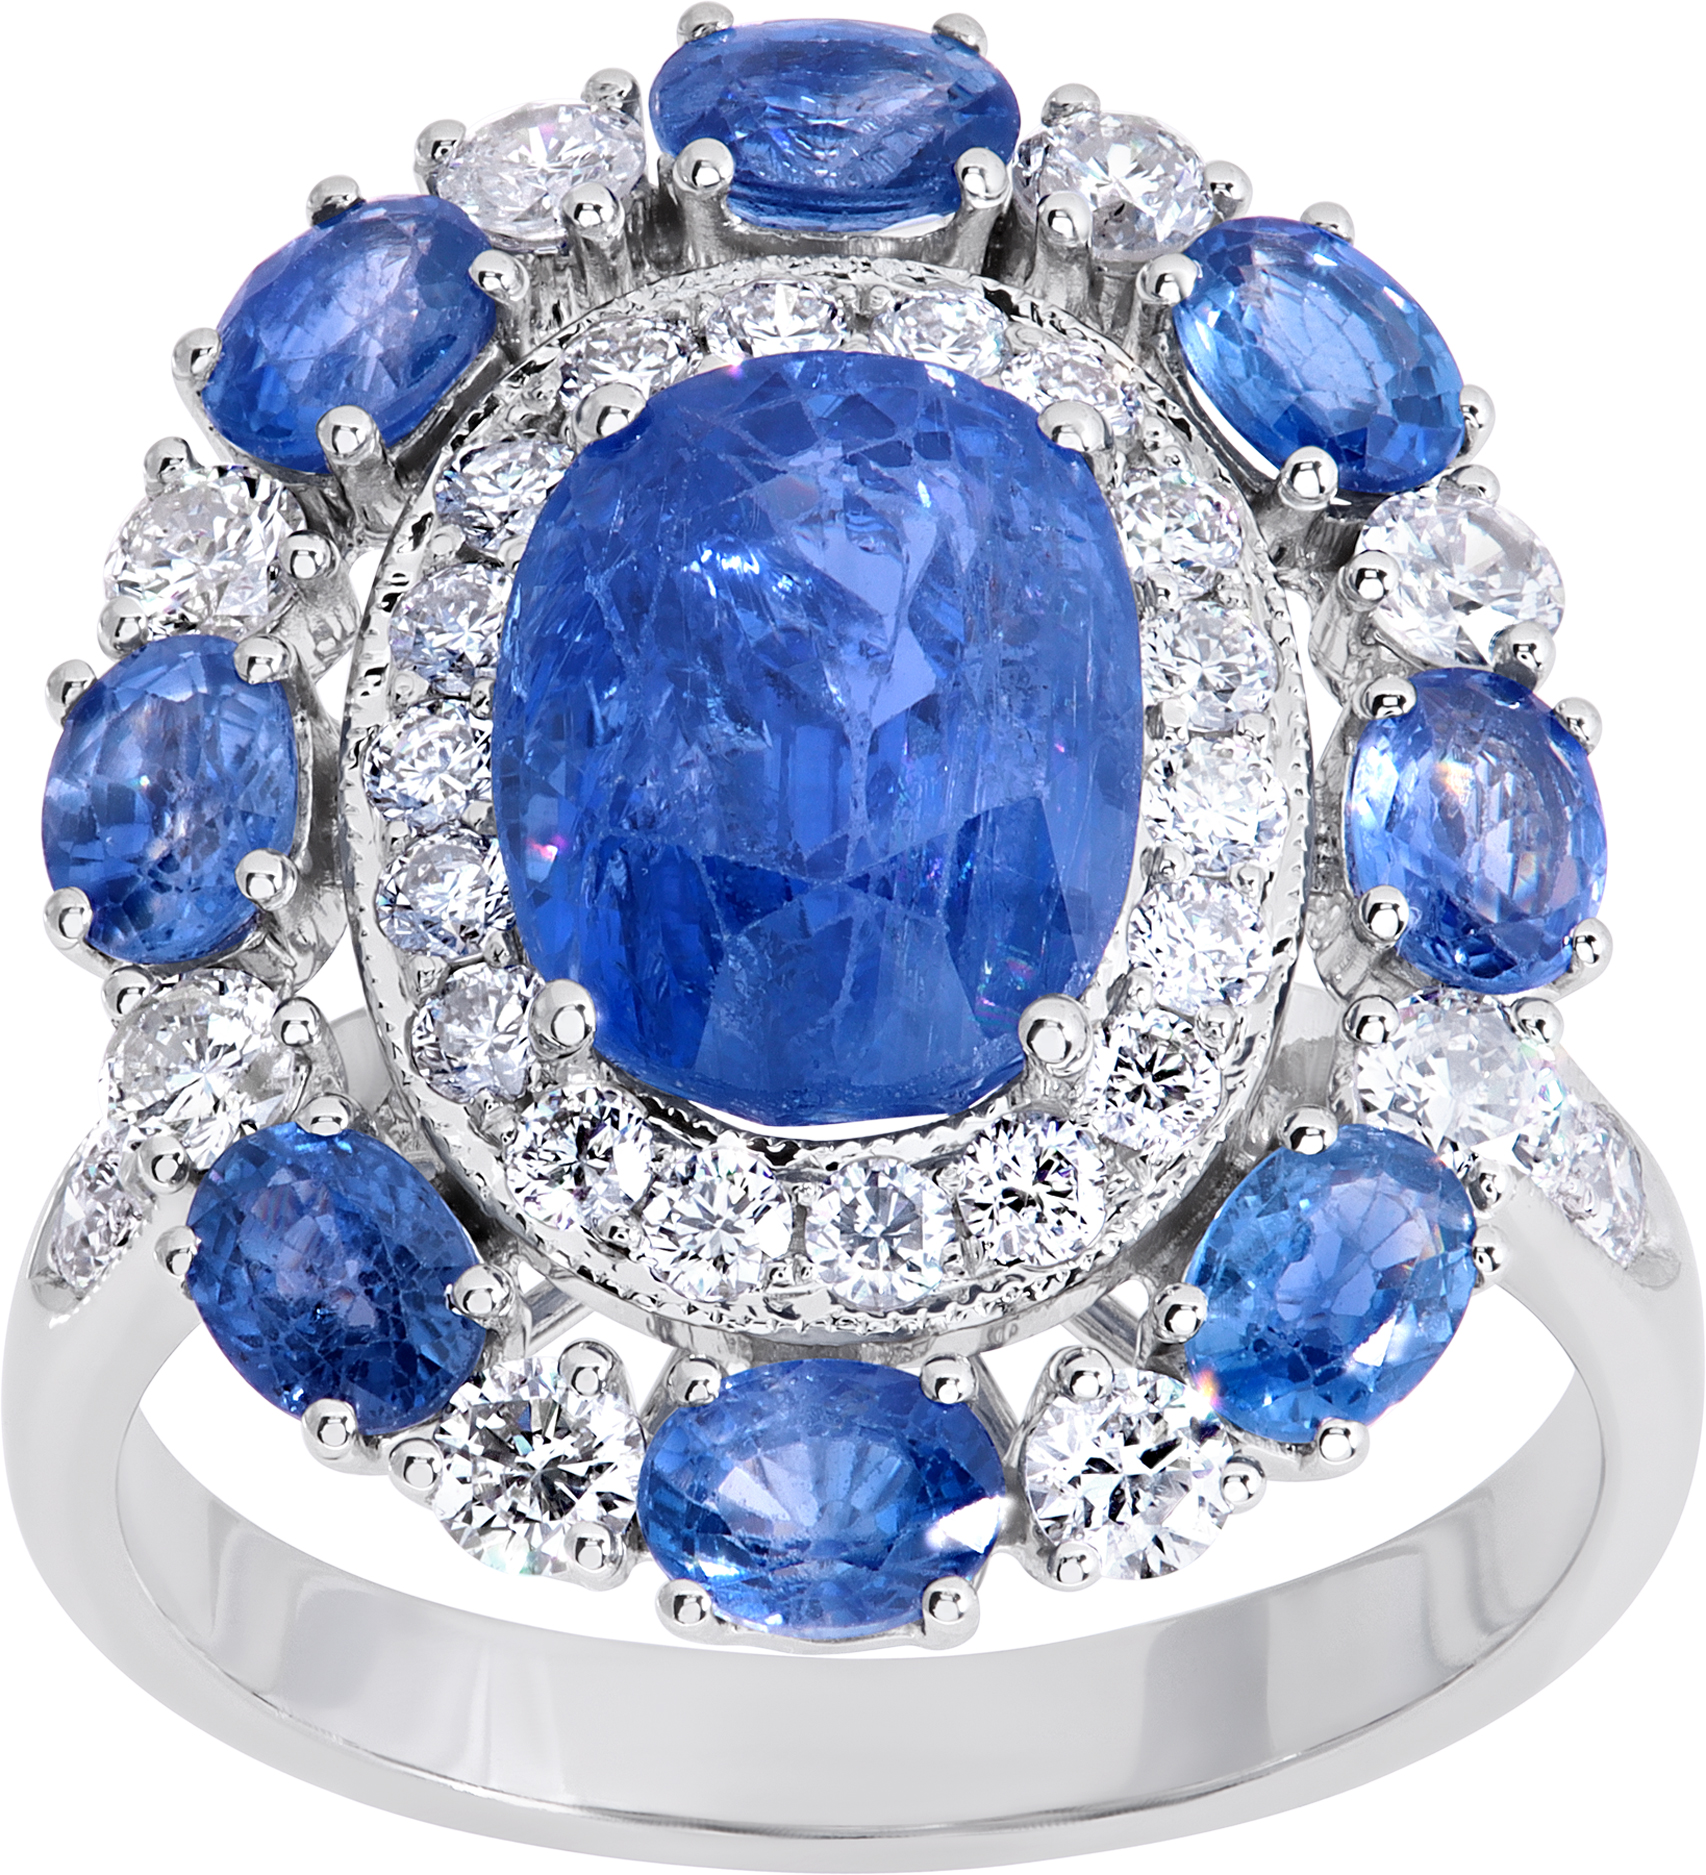 Blue Saphire and diamond ring in 18k white gold